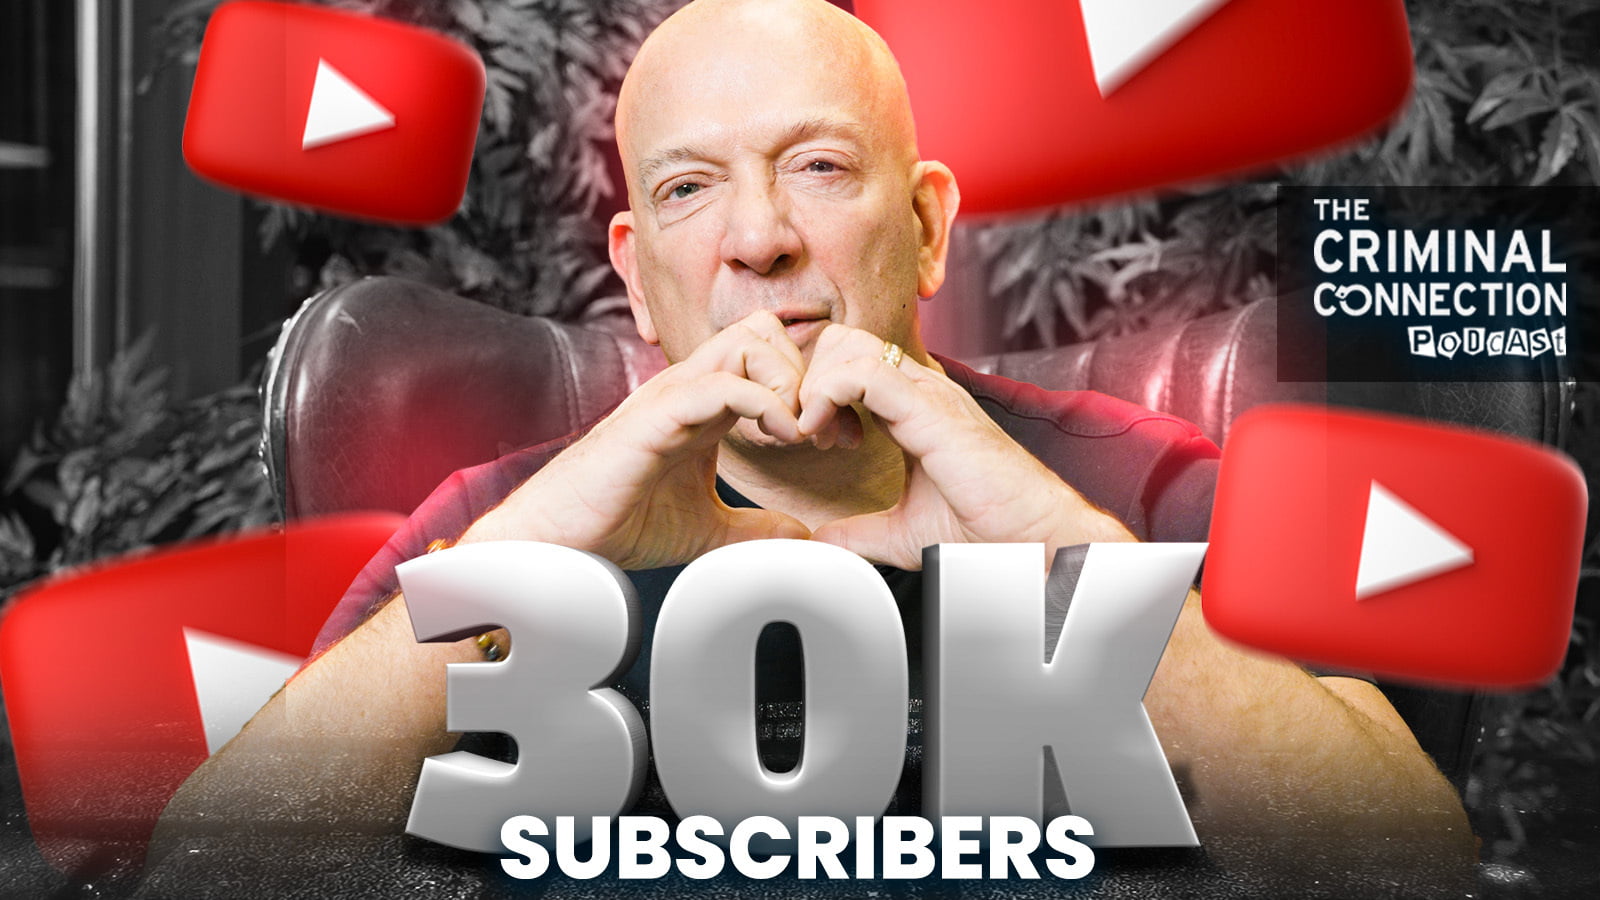 The Criminal Connection Podcast Hits 30,000 YouTube Subscribers Milestone